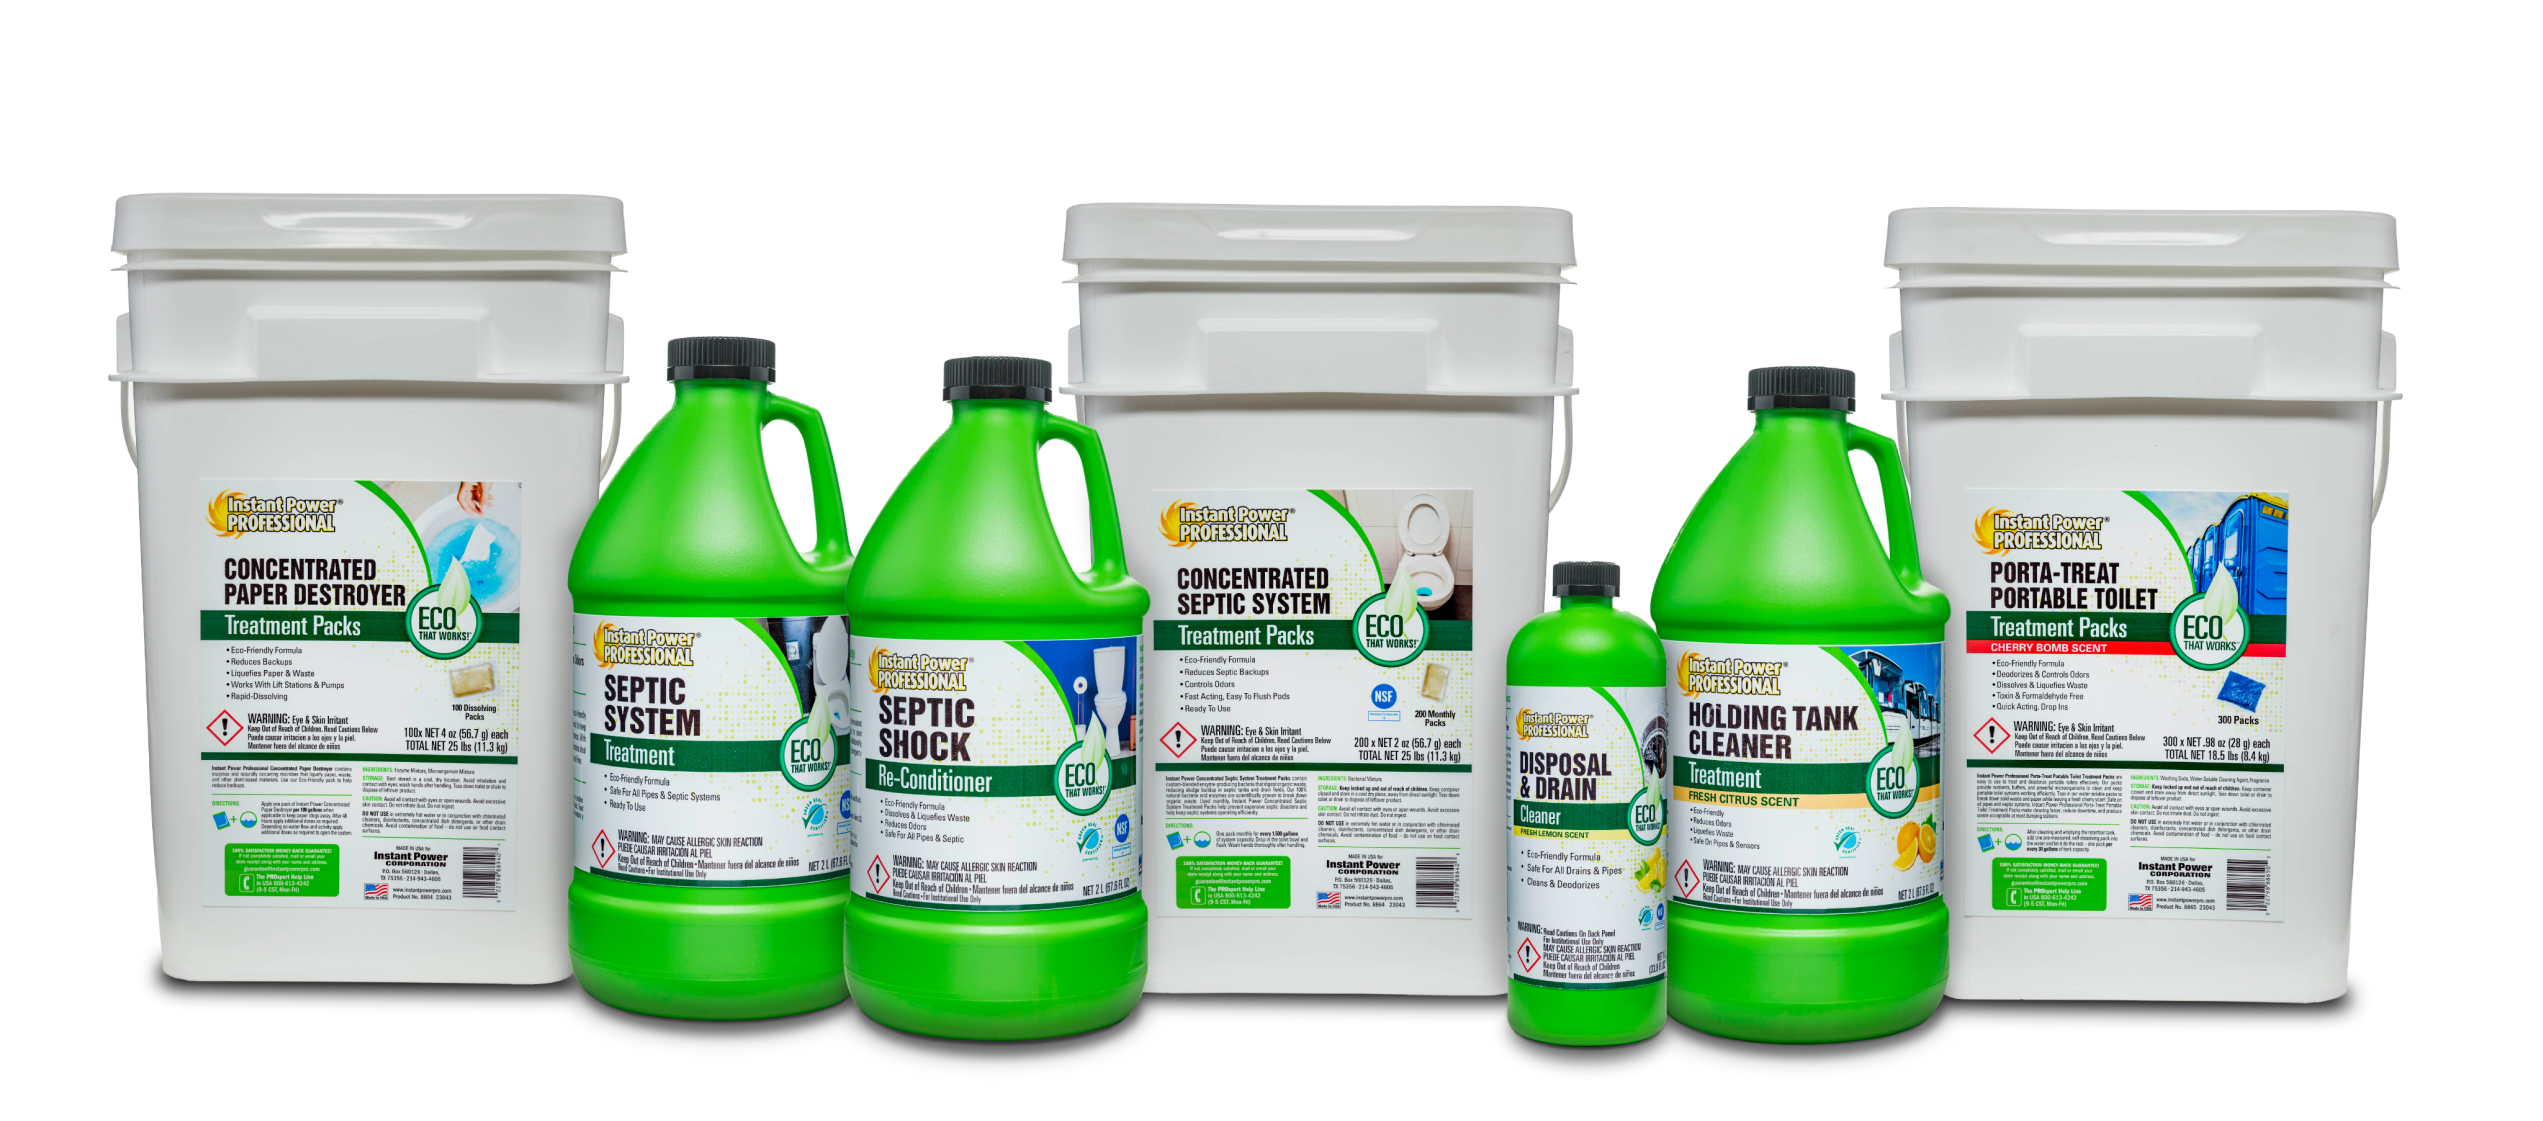 Green sustainable cleaning products that are eco friendly from Instant Power Professional